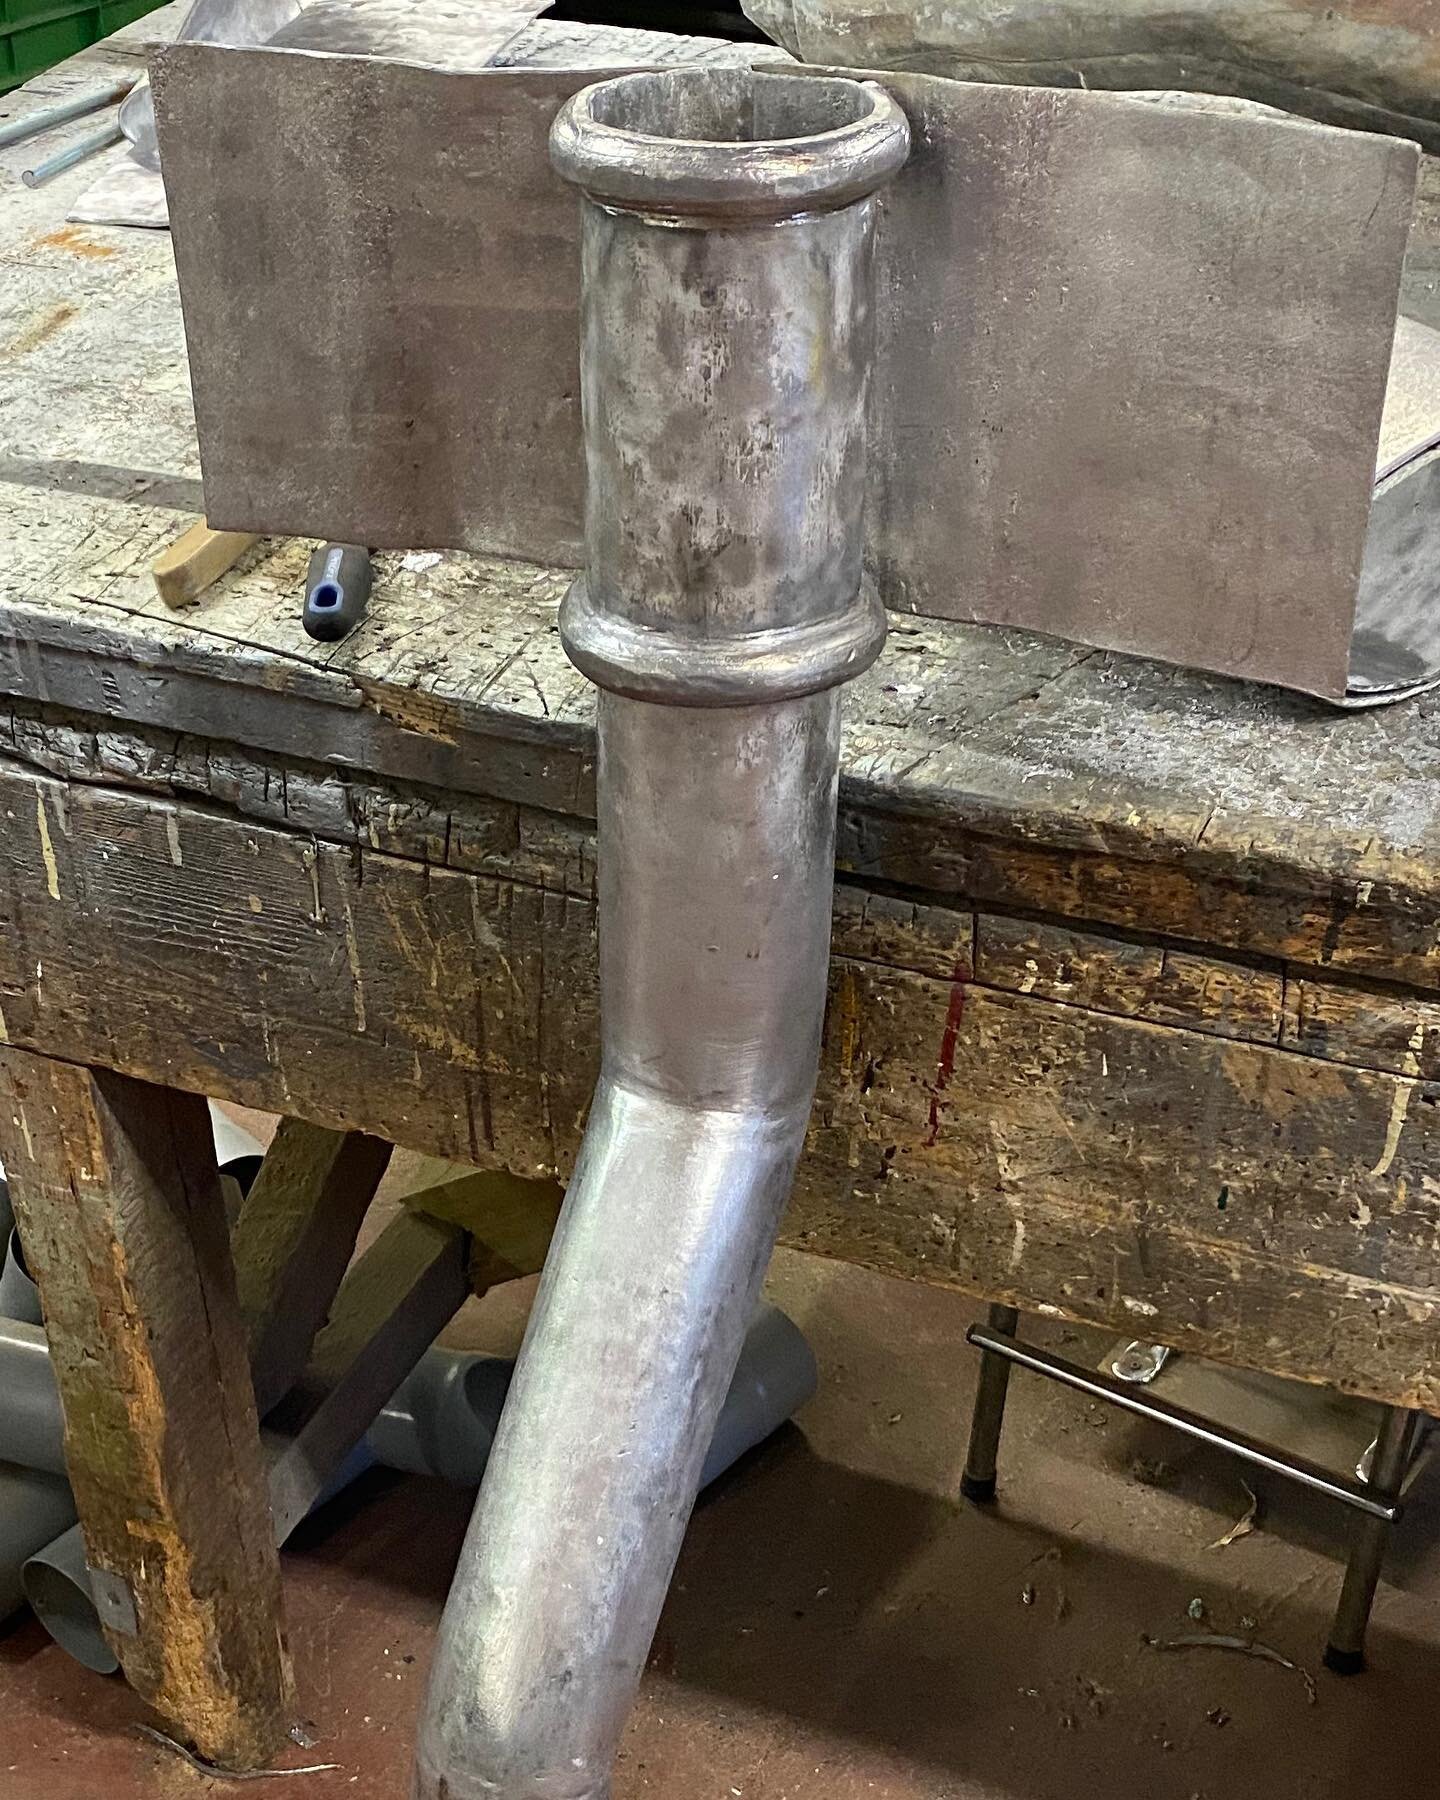 A set of  new sandcast down pipes fabricated ready for the church to be fitted with a nice simple hopper.📞07983131947
#leadwork #leadworker #leadworkers #leadroof #leadroofer #leadroofing #church #heritage #heritageroofing #leadspecialists #builders